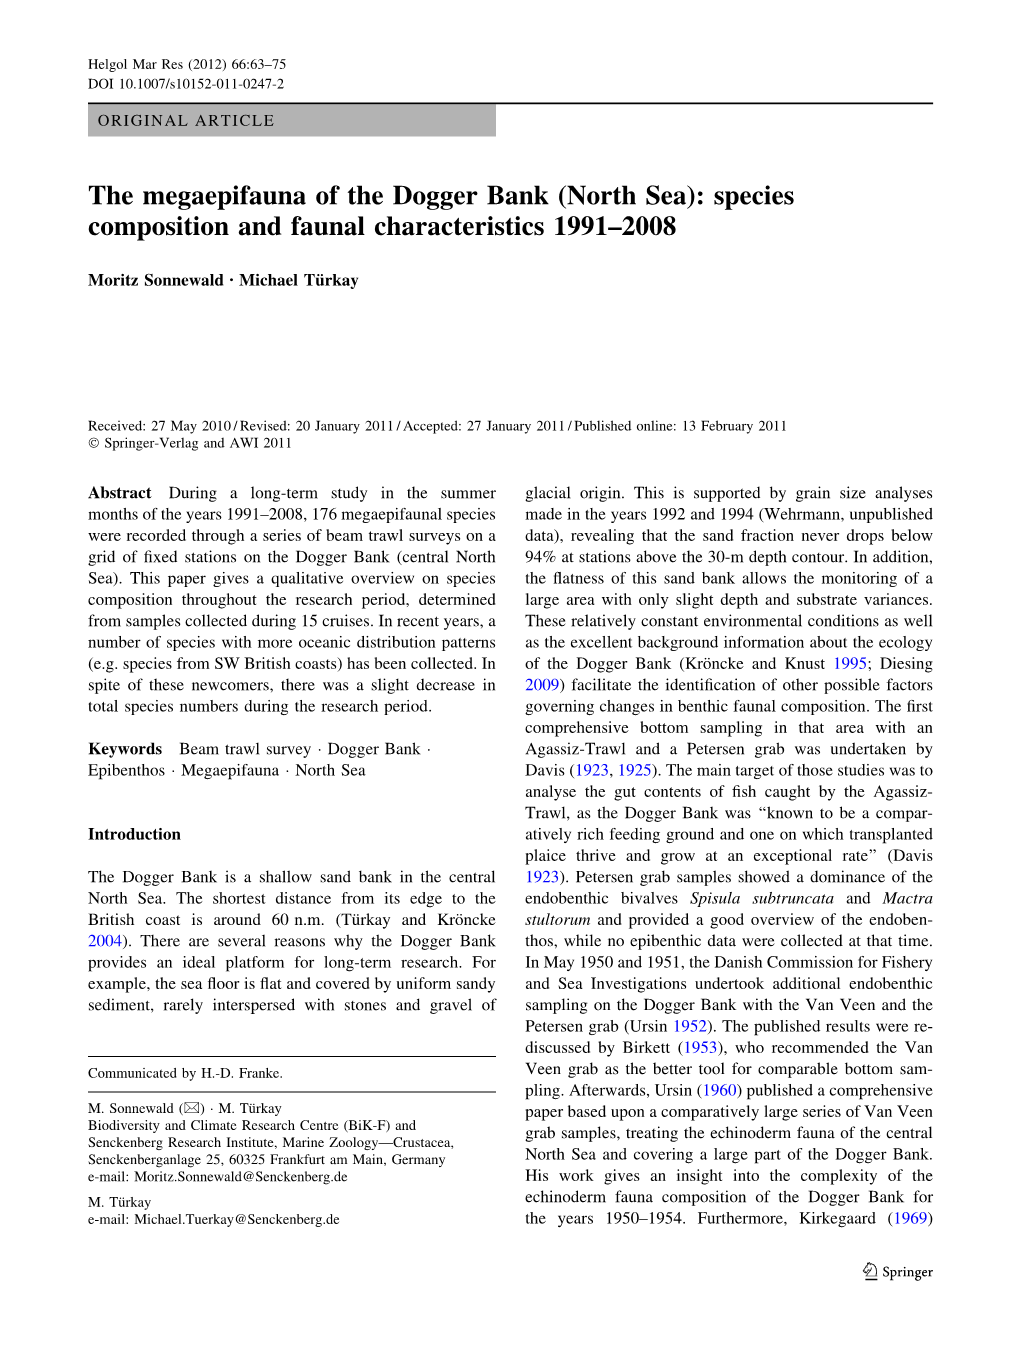 (North Sea): Species Composition and Faunal Characteristics 1991–2008